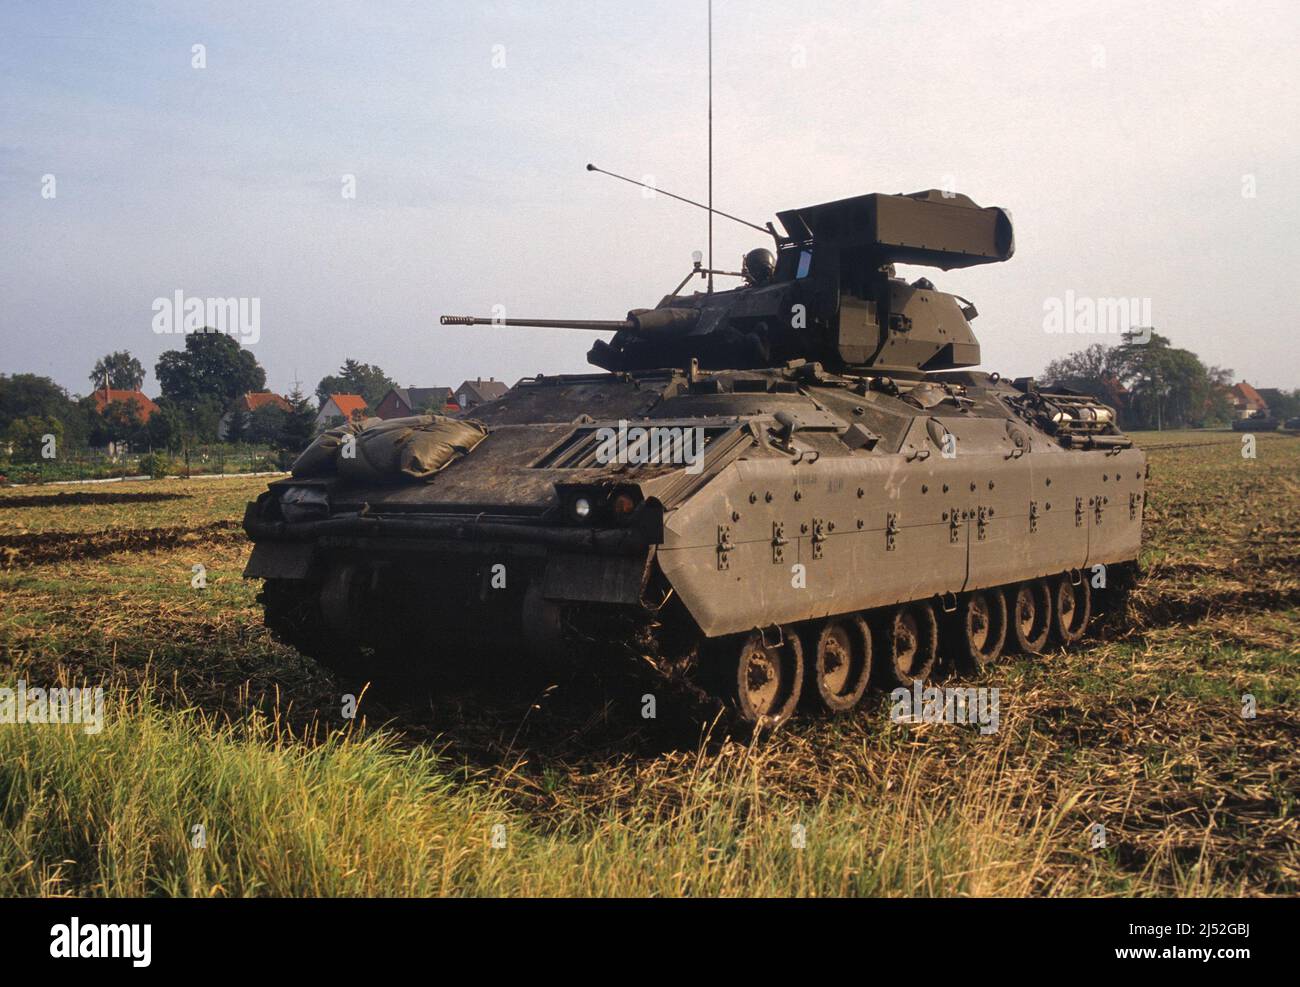 US Army, M3 Bradley infantry fighting vehicle  during  NATO exercises in Germany (November 1990) Stock Photo